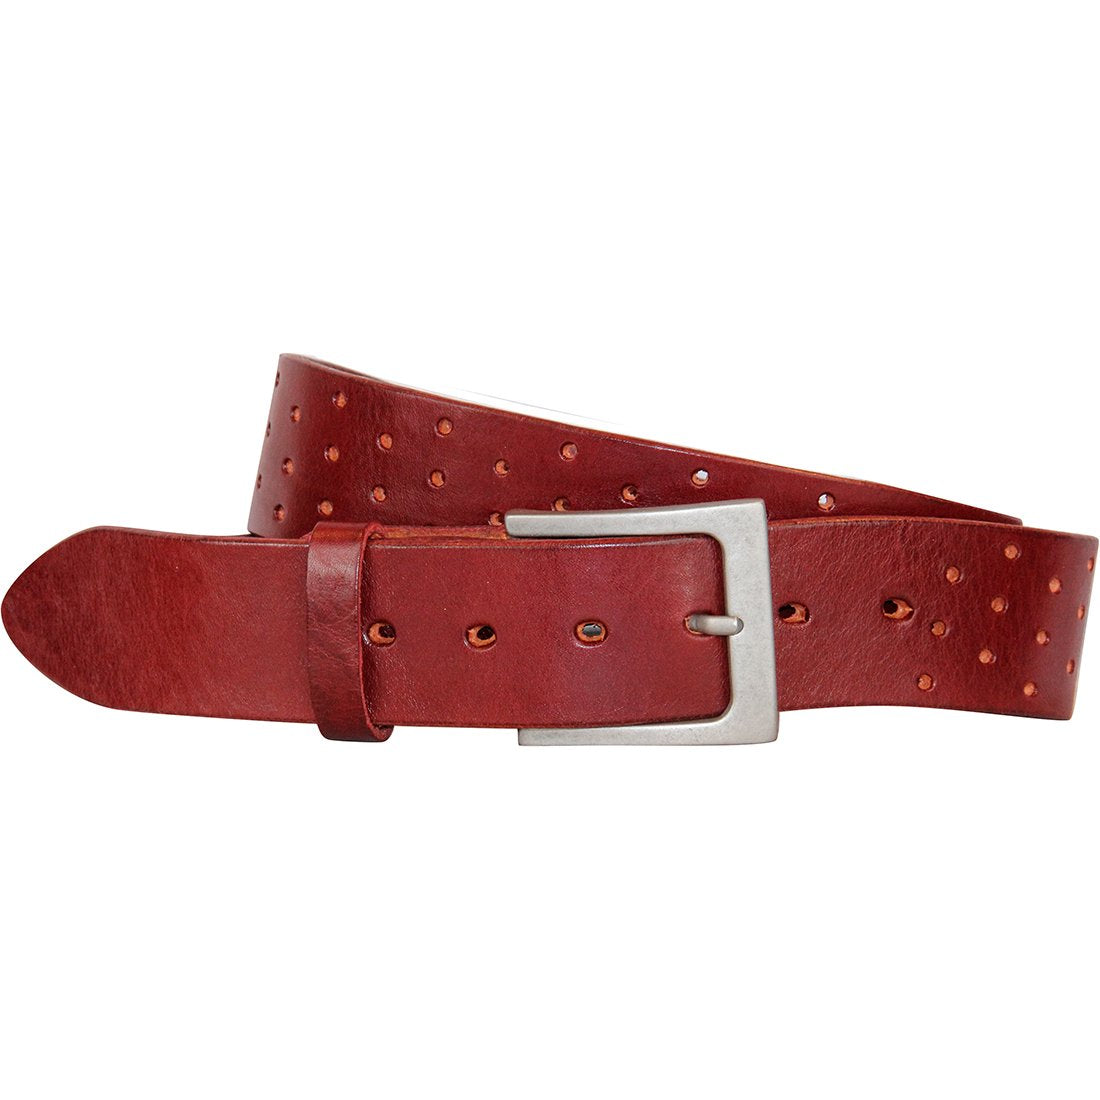 Curved Handmade Leather Belts, Perforata Red